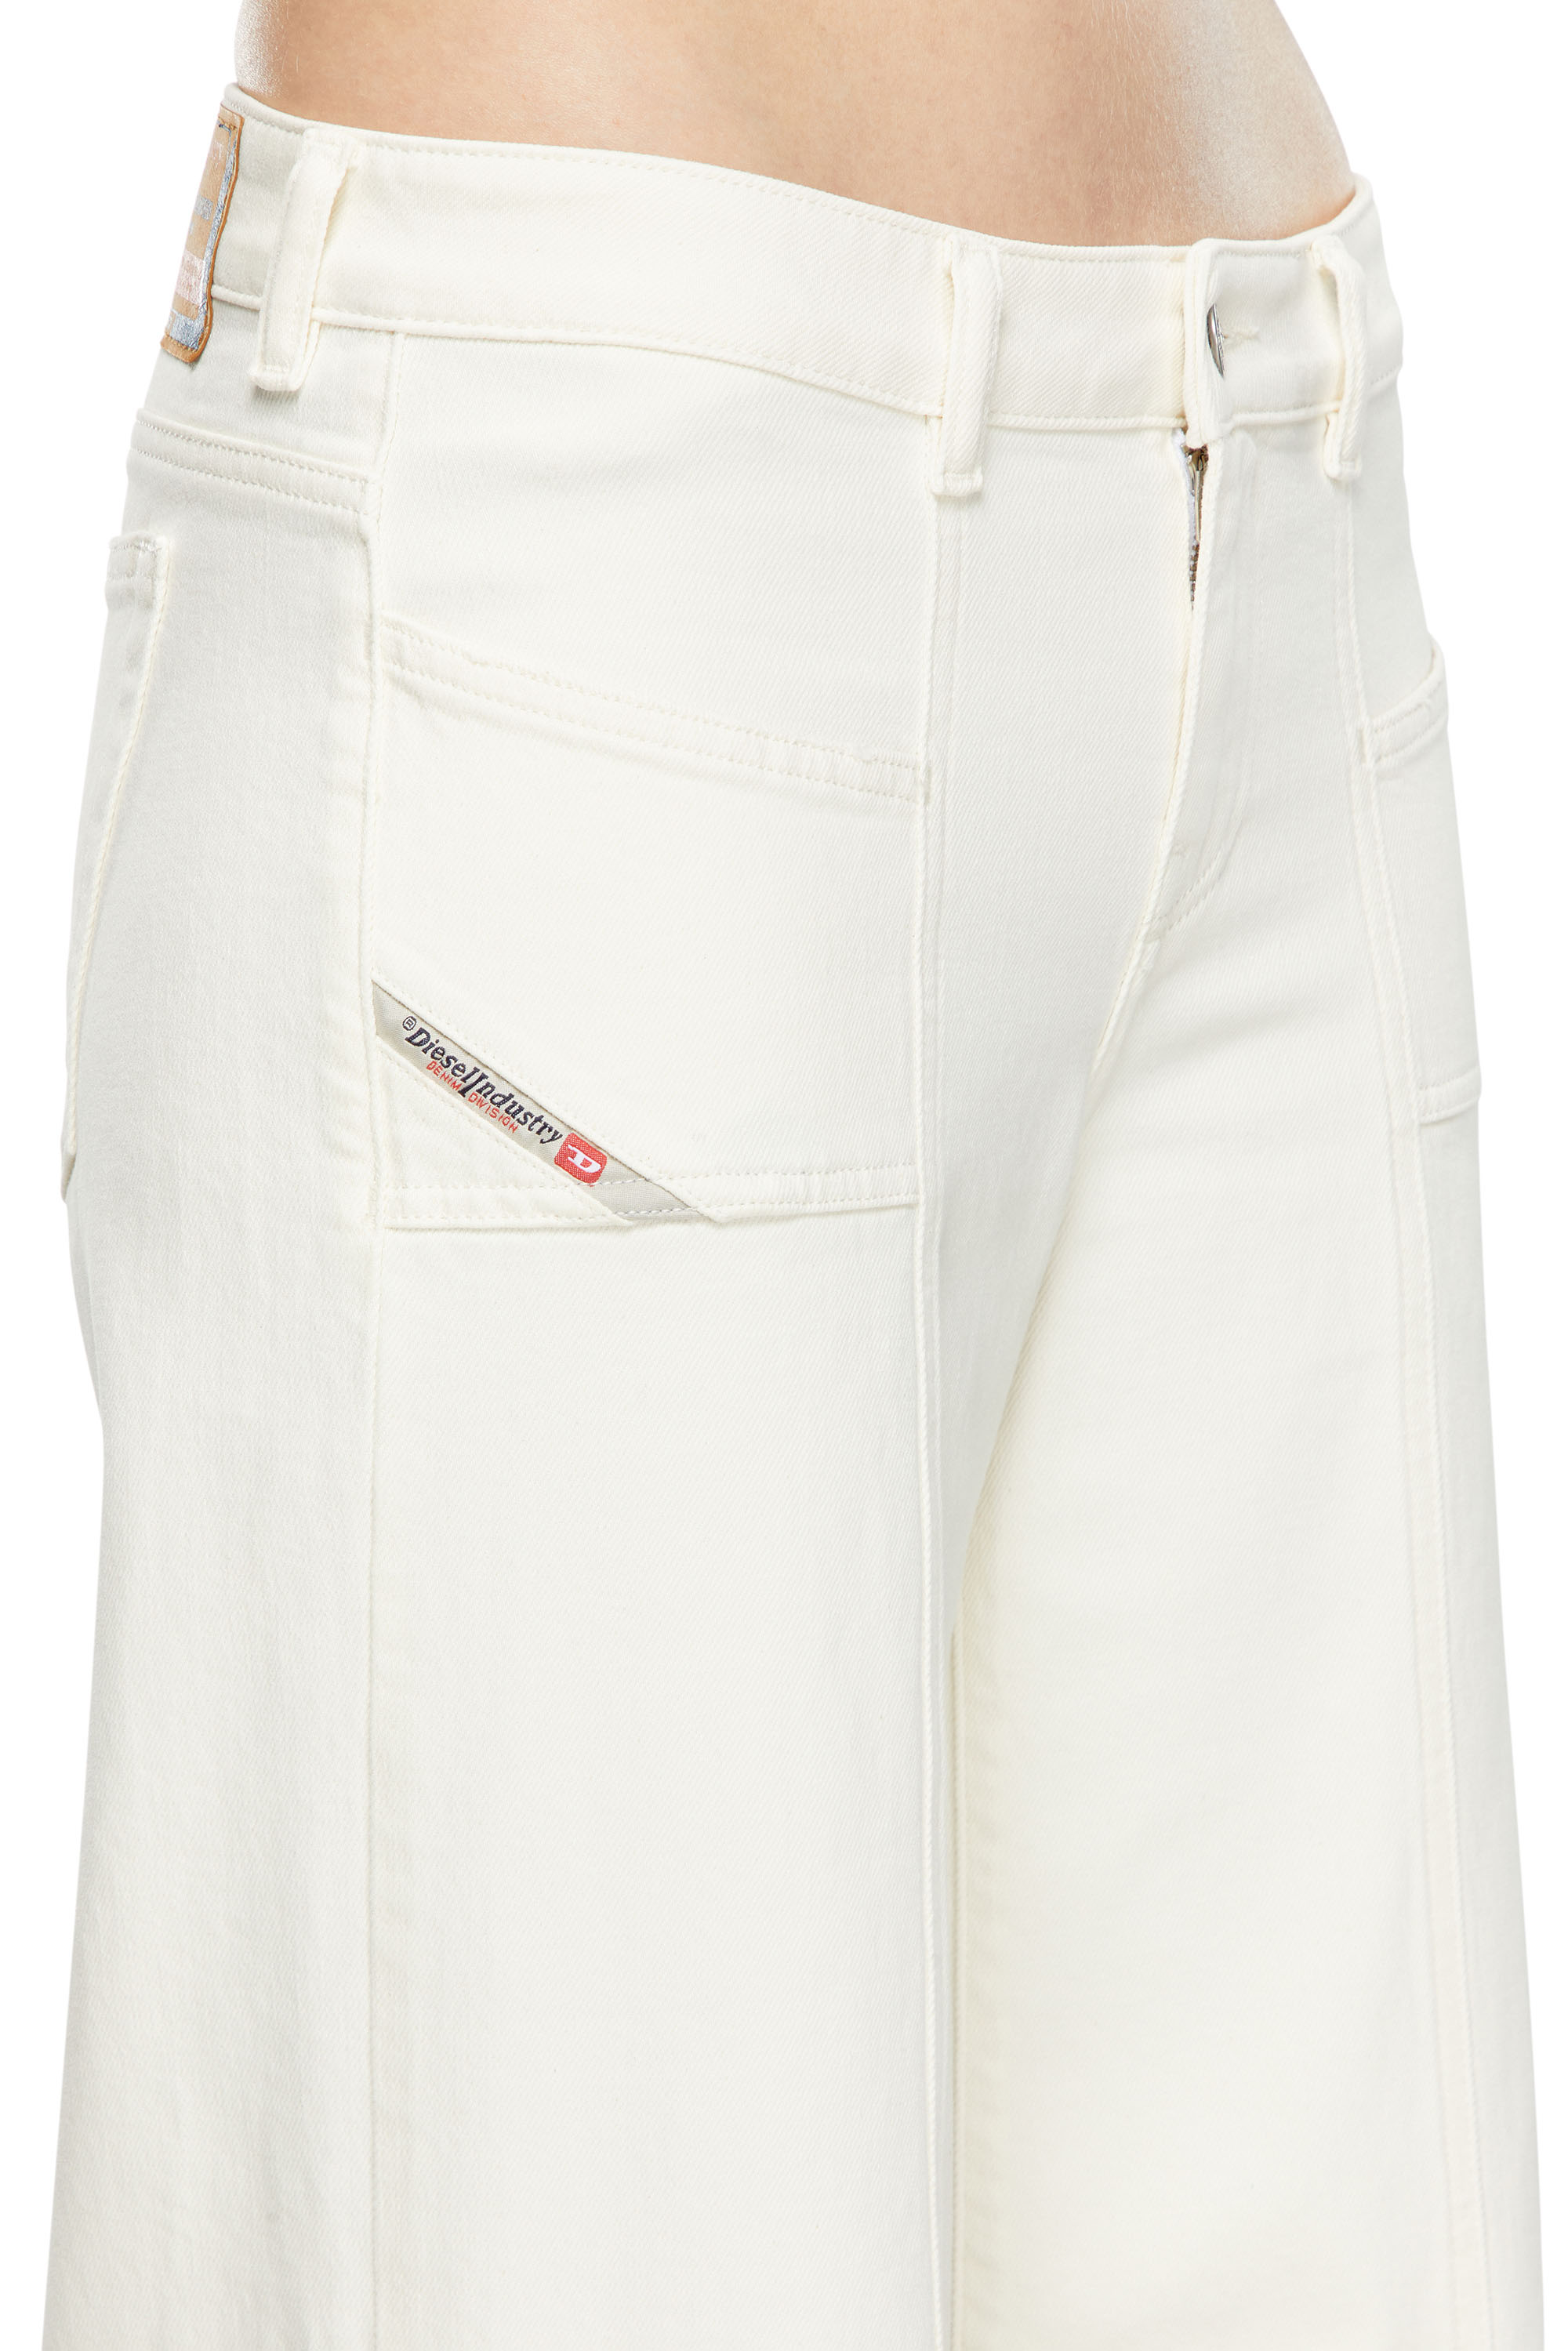 Diesel - Bootcut and Flare Jeans D-Akii 09J68, Mujer Bootcut y Flare Jeans - D-Akii in Blanco - Image 4